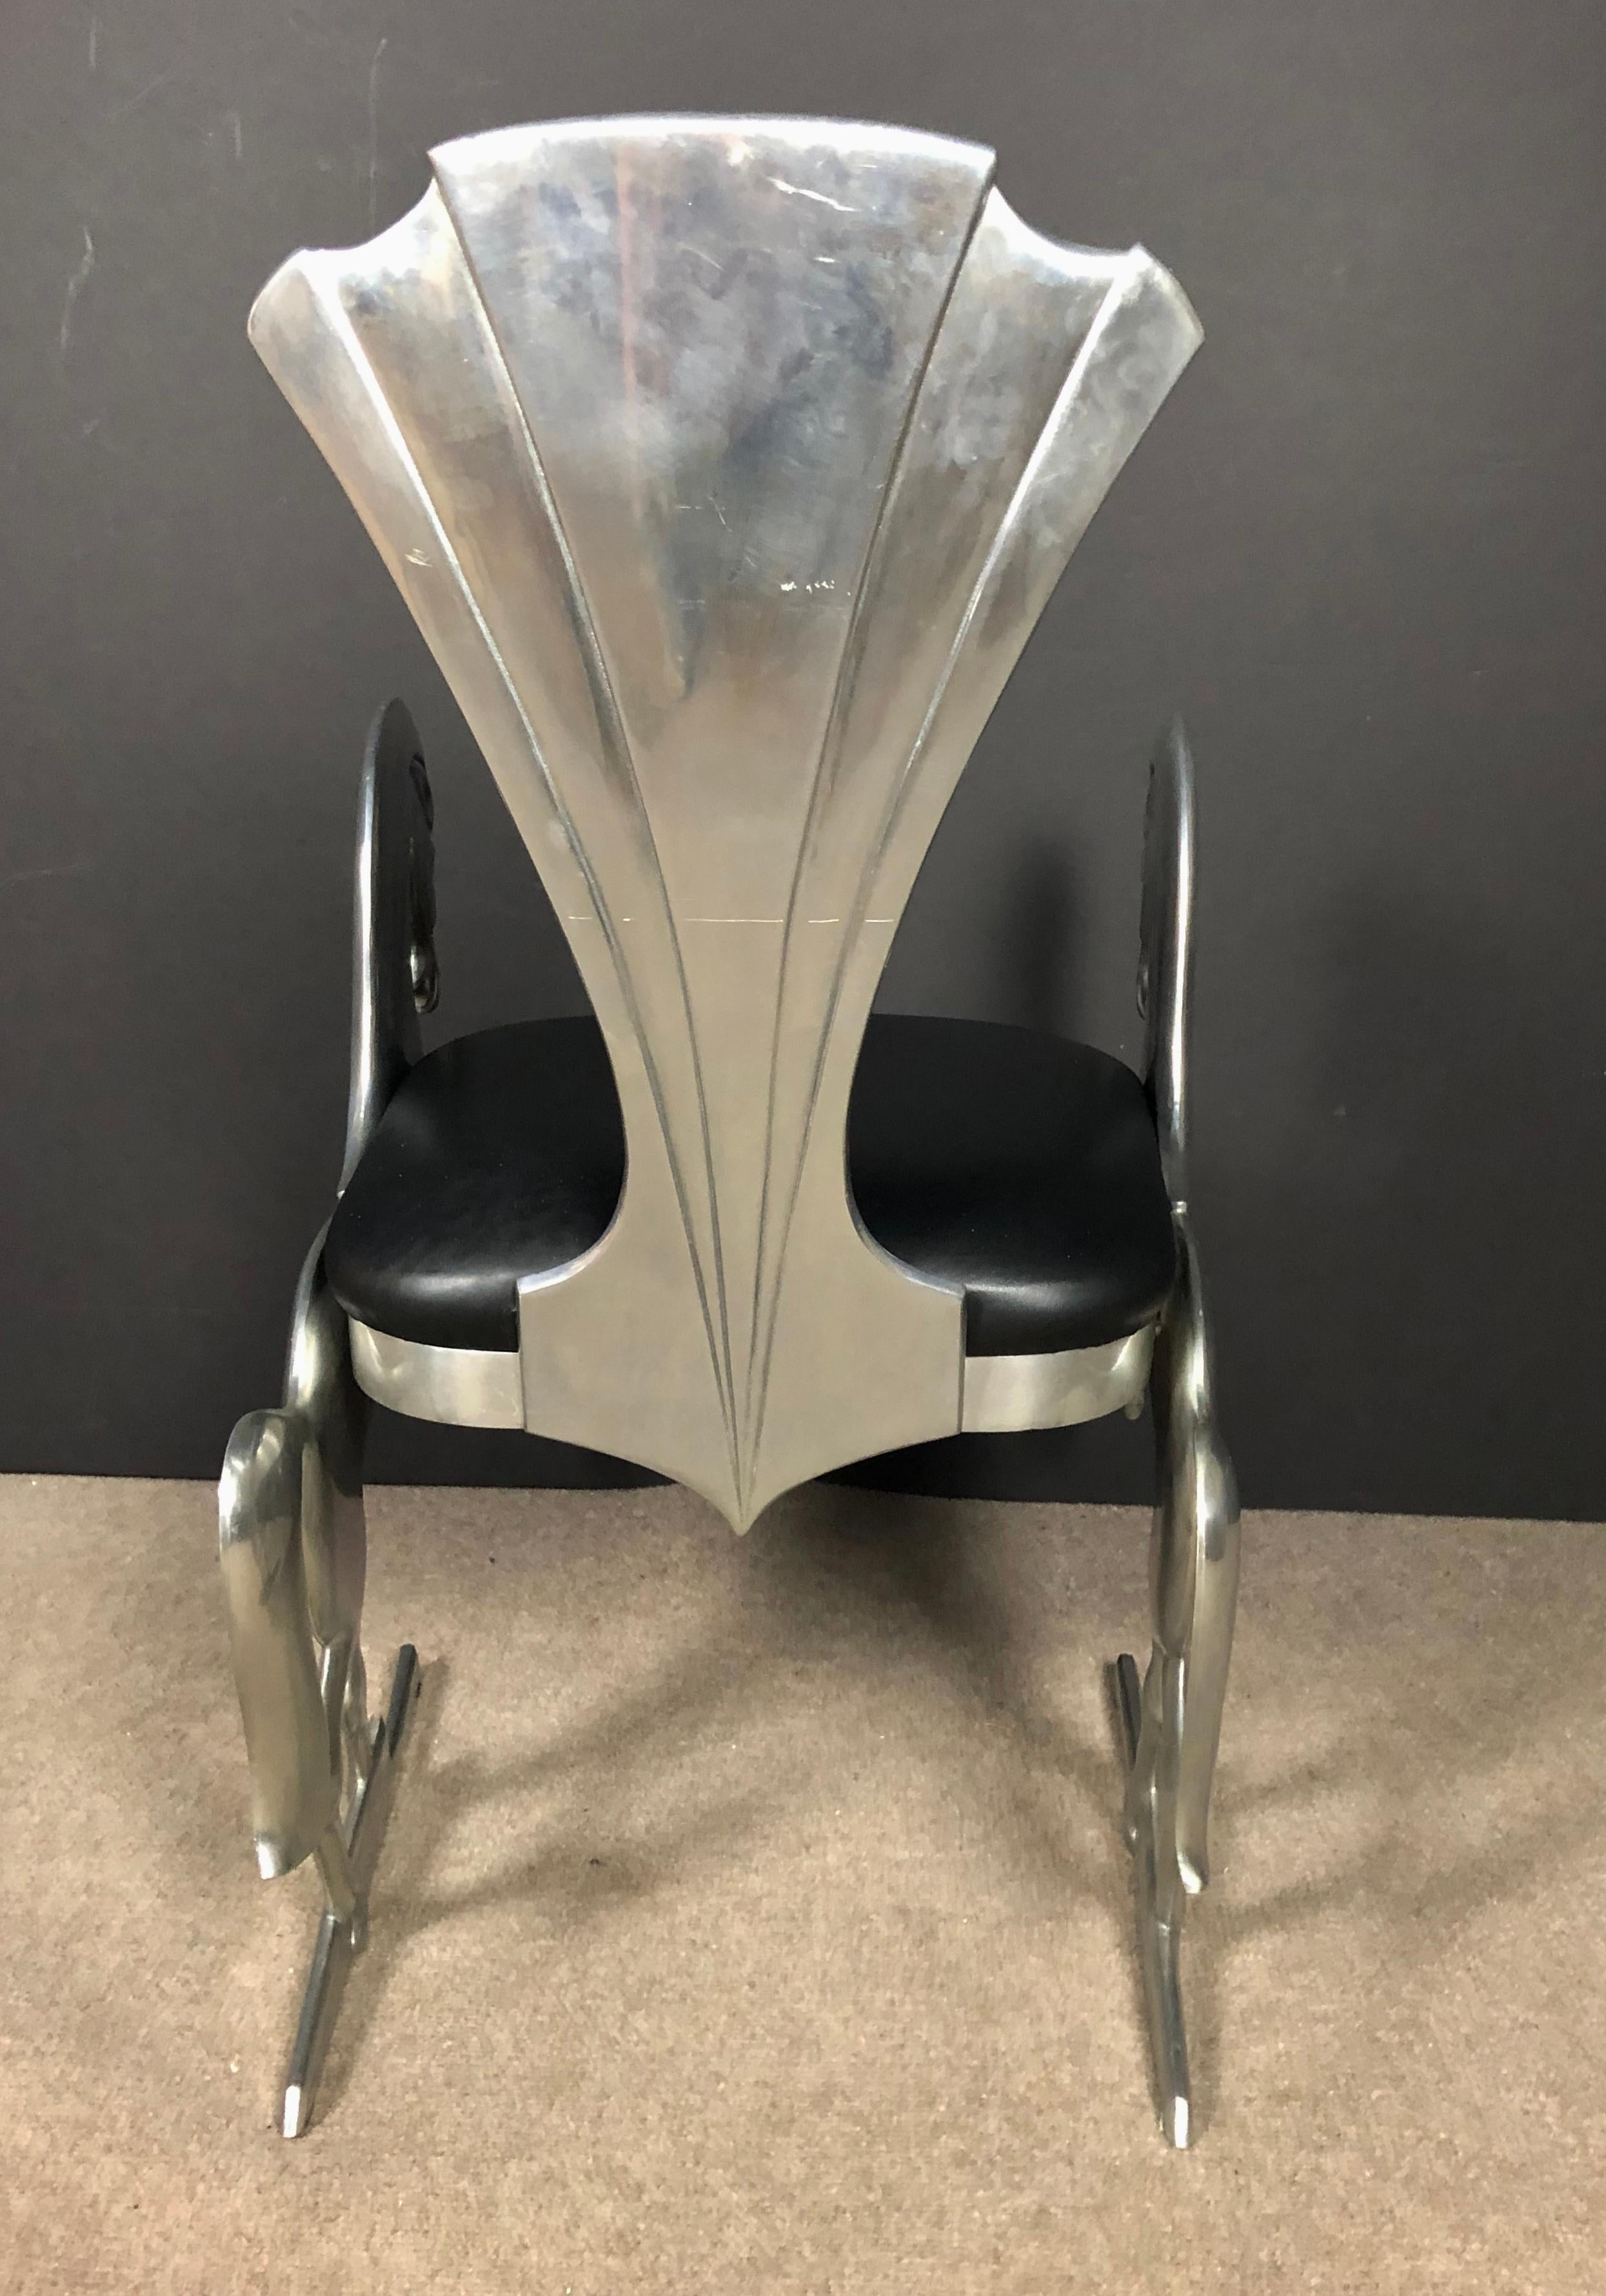 Highly Unusual Artist Signed Sculptural Chair  In Good Condition For Sale In Norwood, NJ